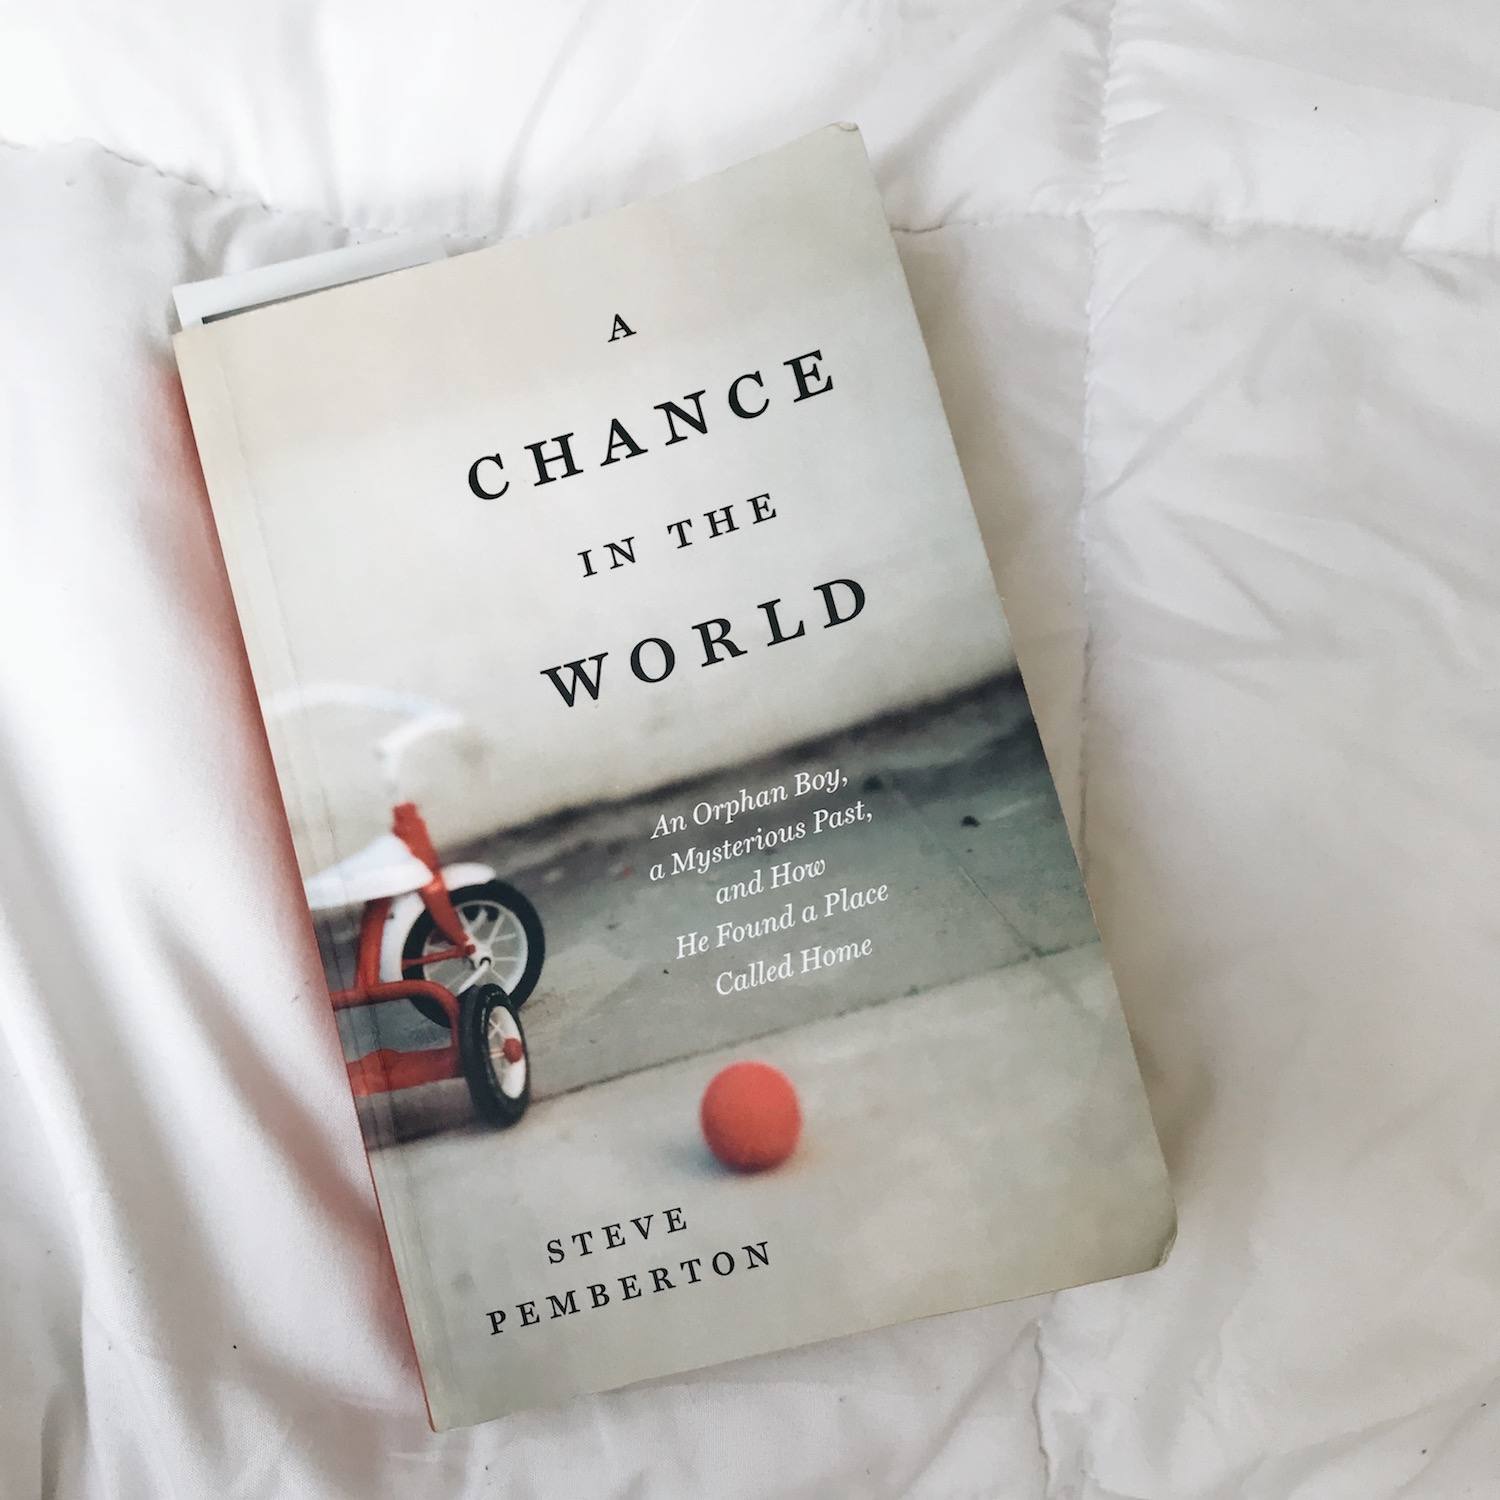 a chance in the world